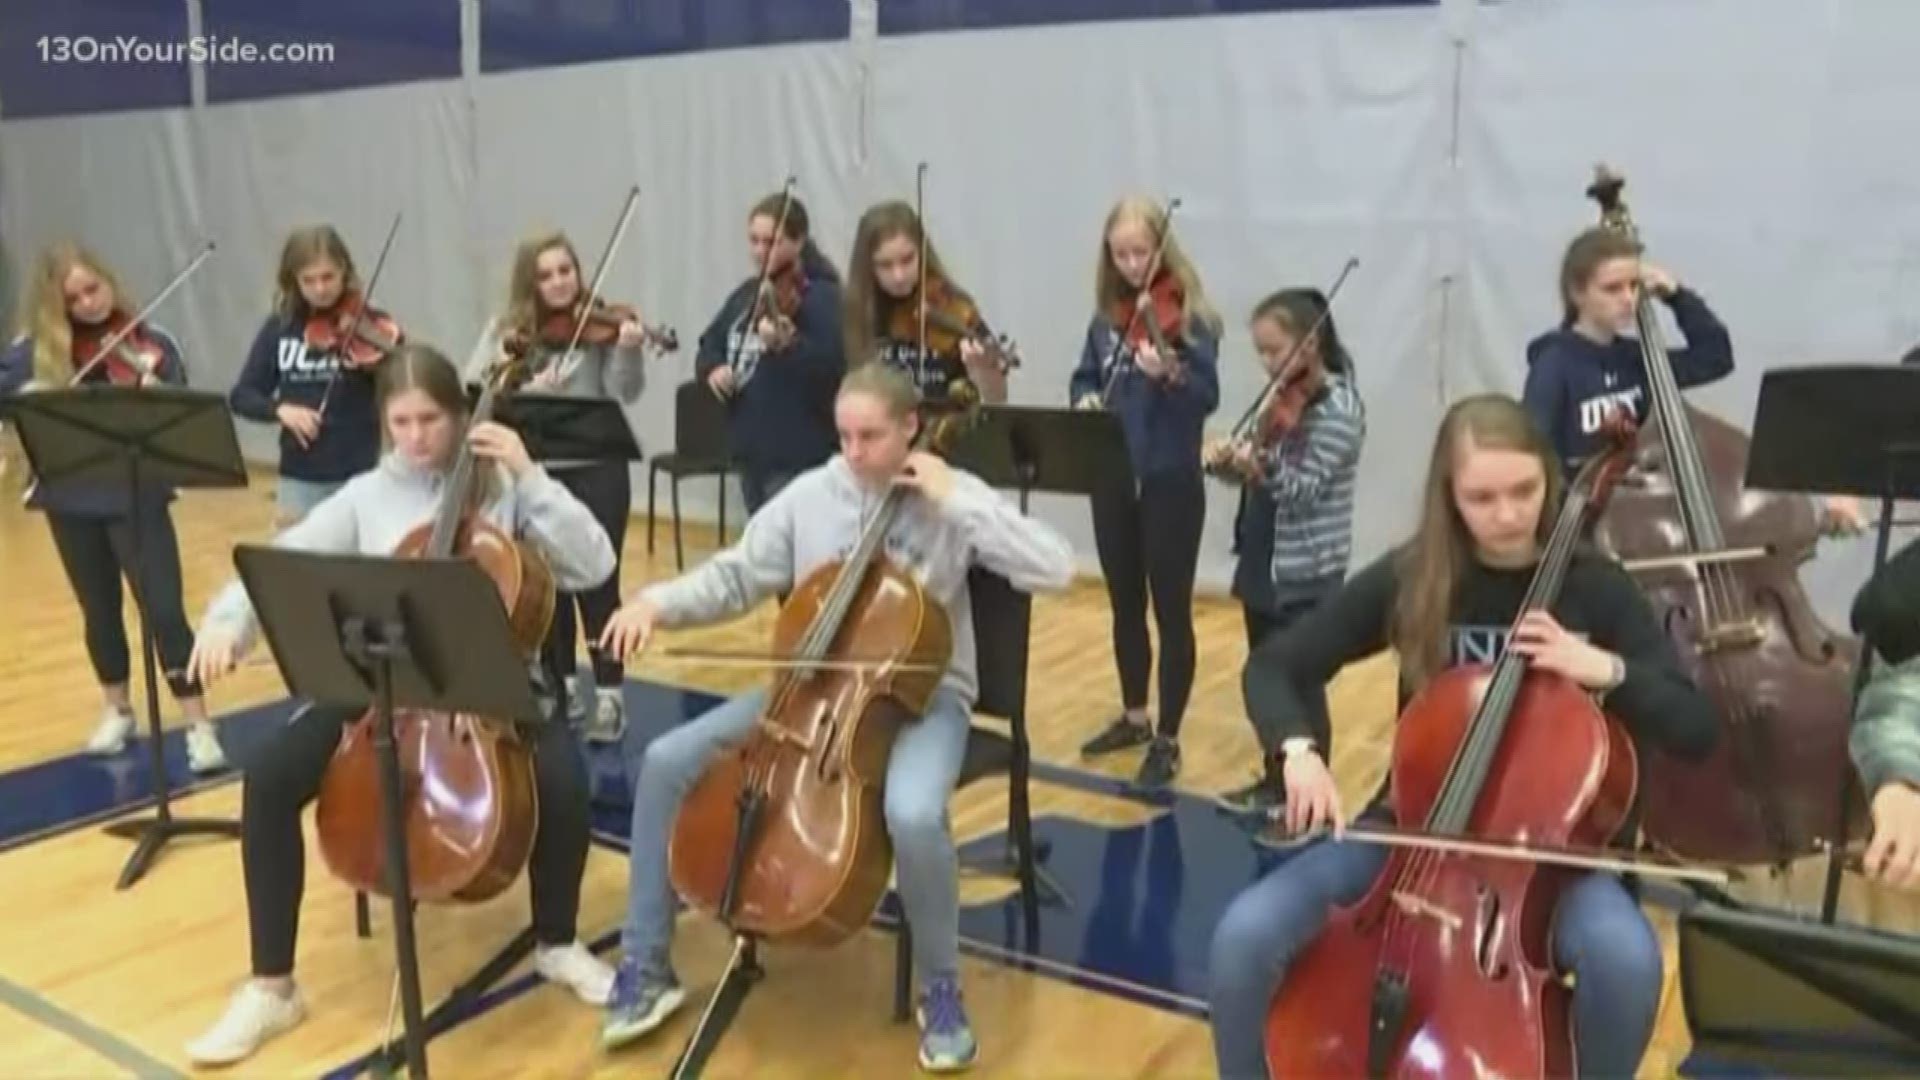 The Unity Christian orchestra shows off their skills.